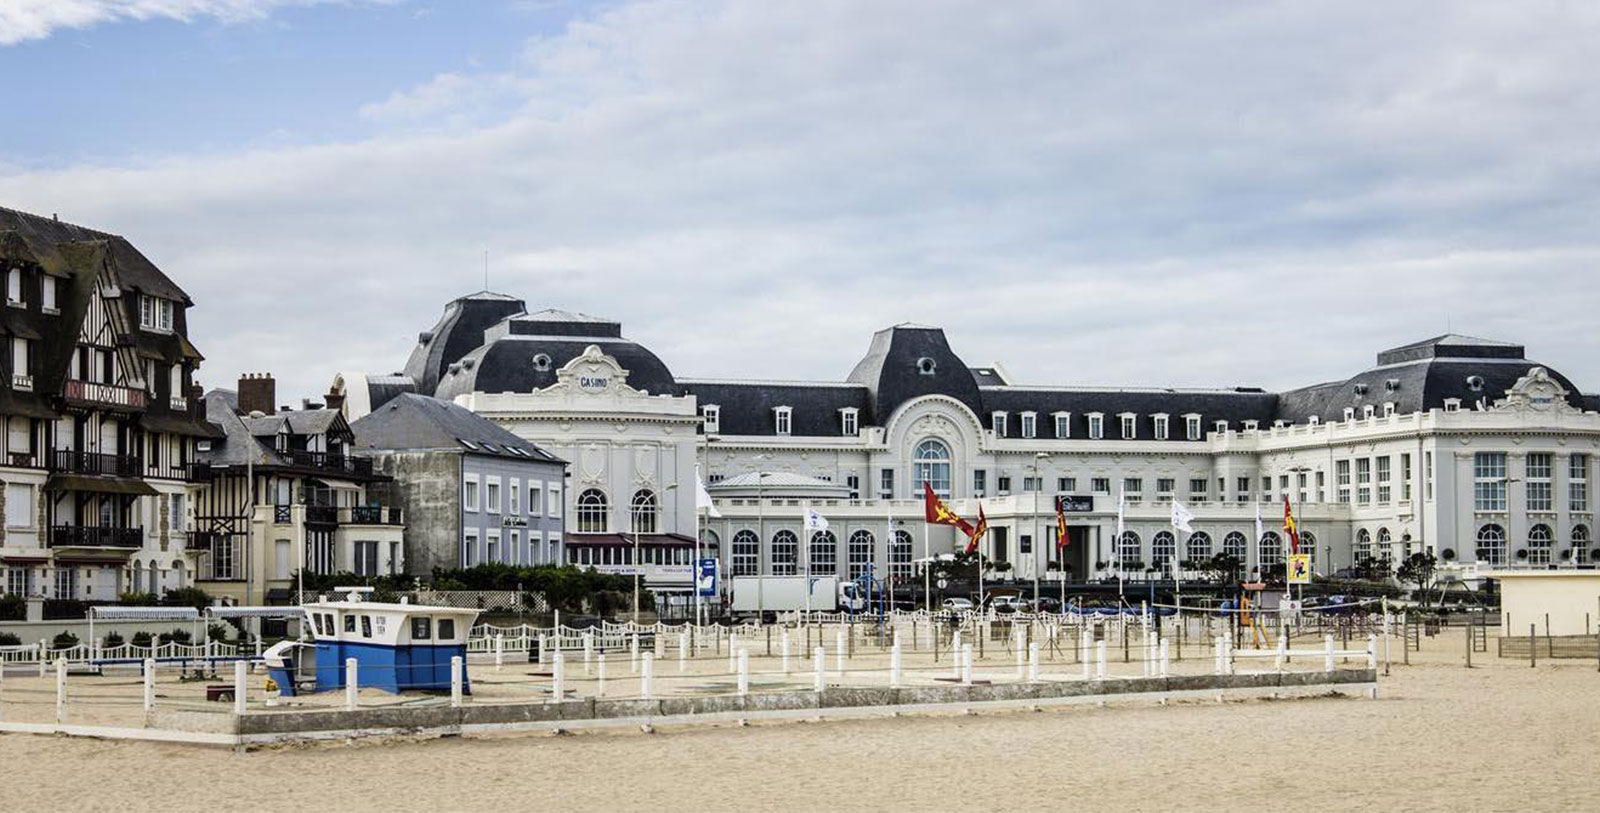 Experience the wonderful Grande Plage and the Port-Deauville mere moments away.